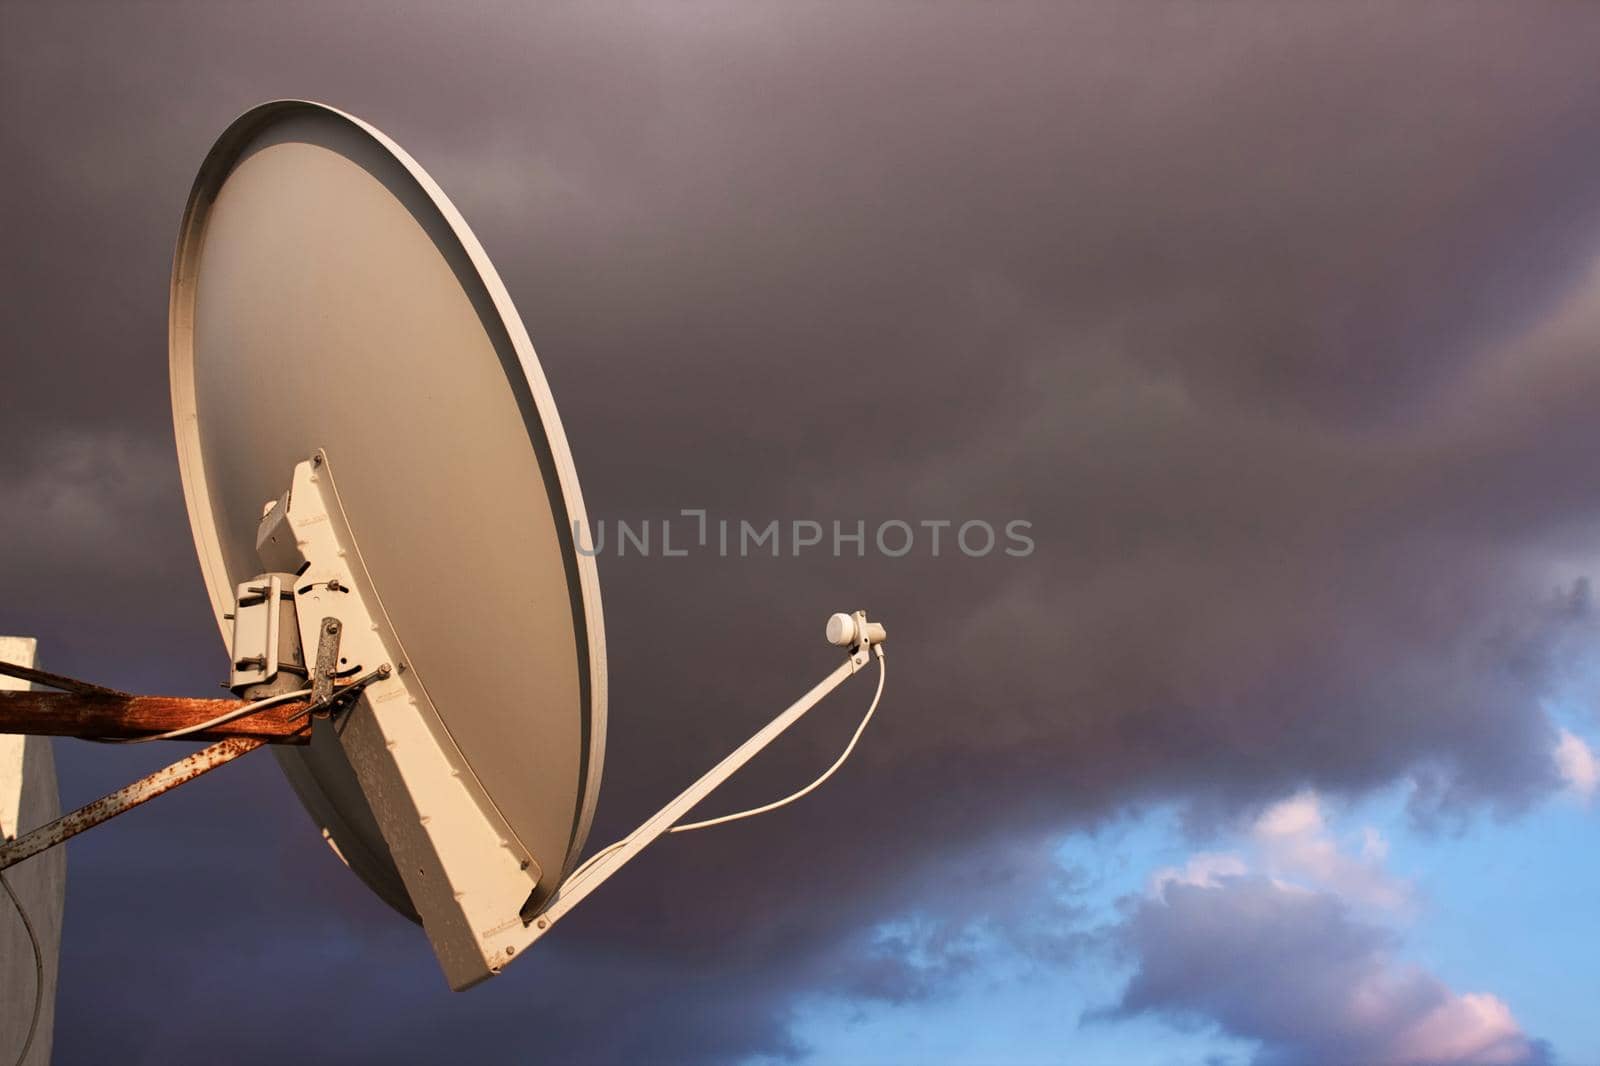 Satellite dish on a rooftop against a cloudy moody sky background by tennesseewitney